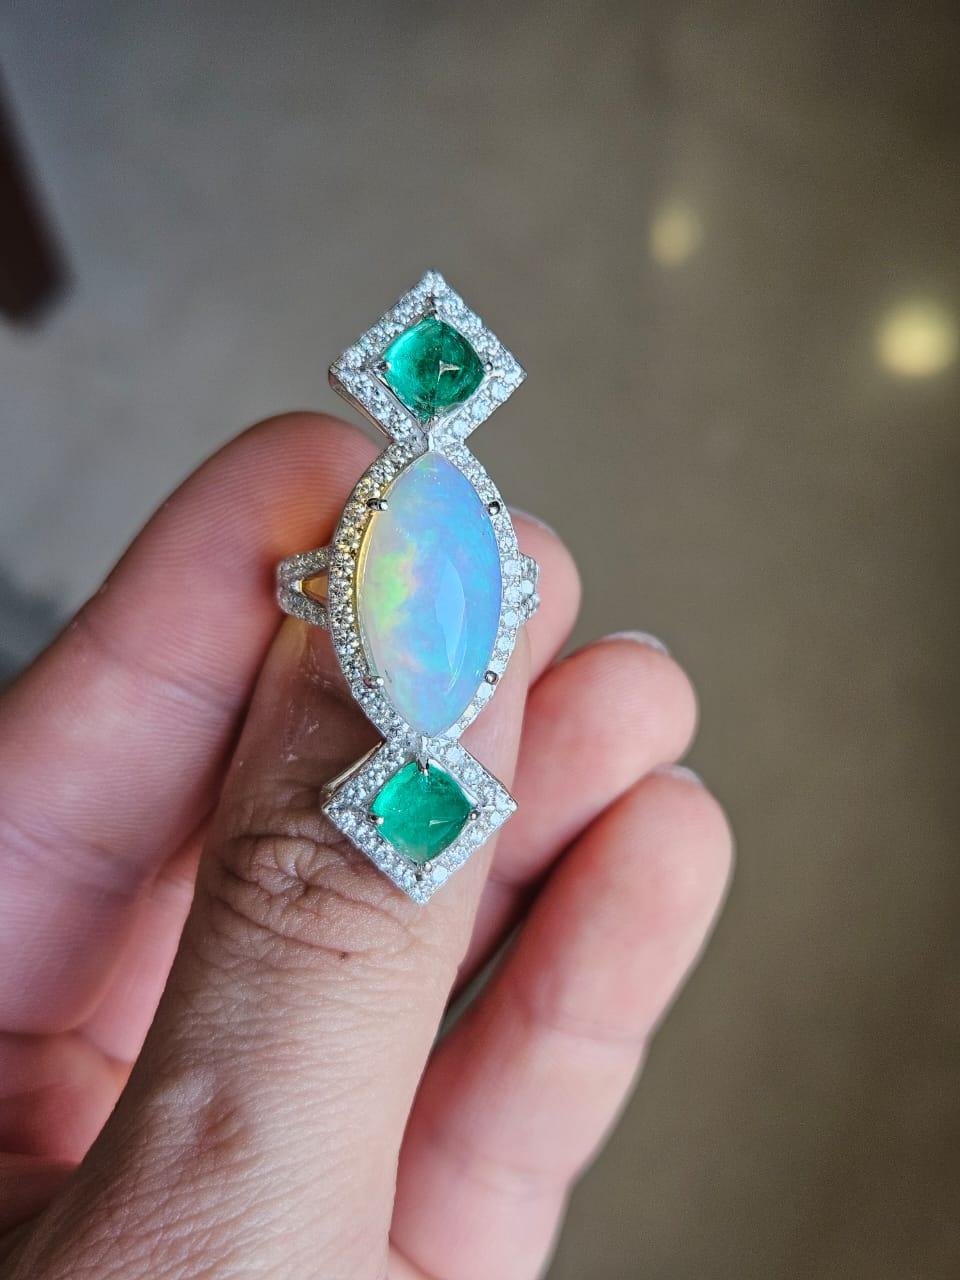 A very gorgeous and beautiful, Emerald & Opal Cocktail Ring set in 18K White Gold & Diamonds. The weight of the Marquise shaped Cabochon Opal is 6.37 carats. The Opal is of Ethiopian origin. The weight of the Emerald sugarloaf is 2.54 carats. The